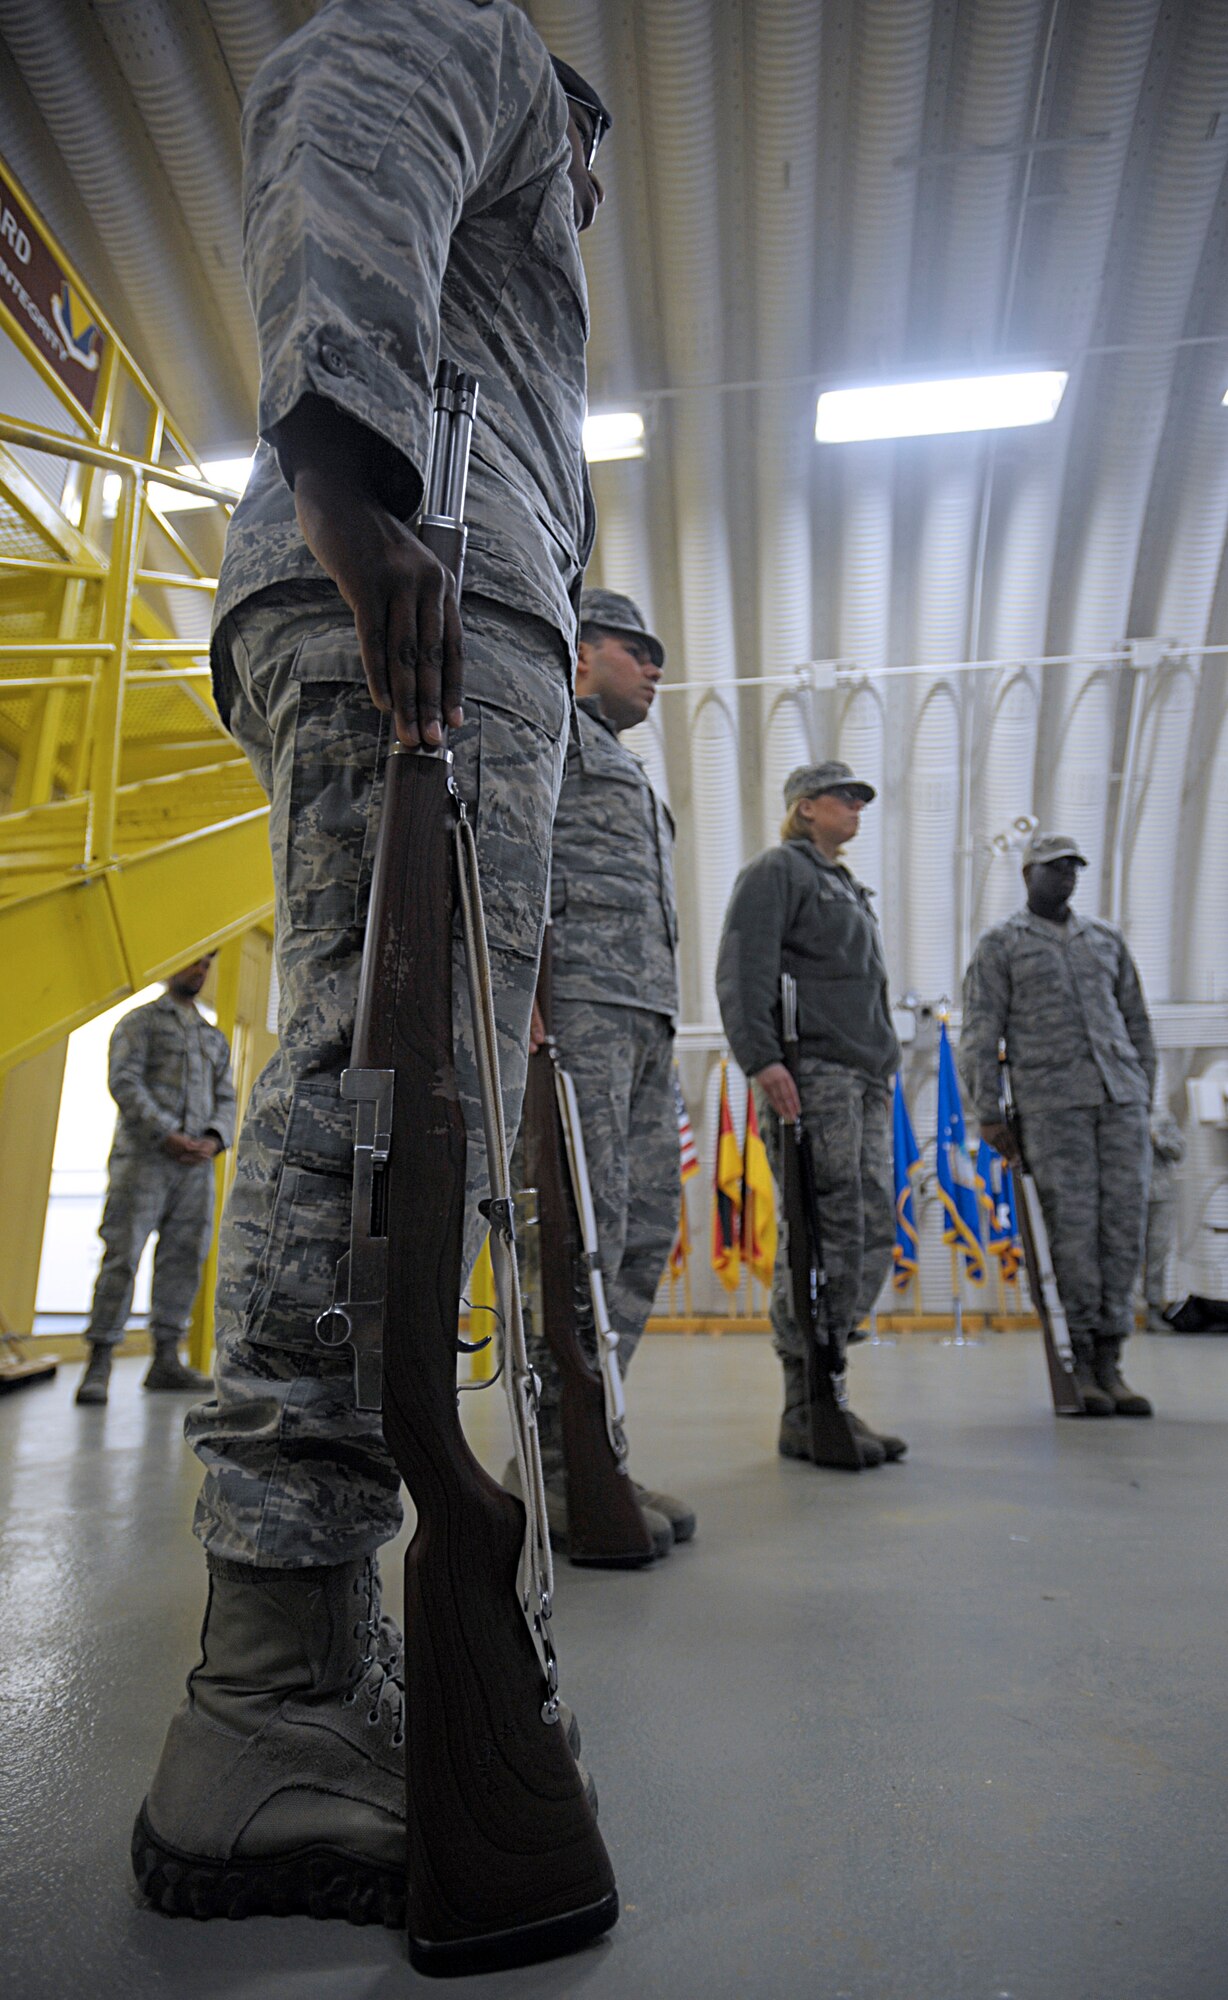 Members of the Ramstein Honor Guard practice the placement of ceremonial rifles March 15, 2016, at Ramstein Air Base, Germany. The honor guardsmen, who are assigned to different units across Ramstein, got the opportunity to learn from members of the U.S. Air Force Honor Guard. (U.S. Air Force photo/Staff Sgt. Timothy Moore)